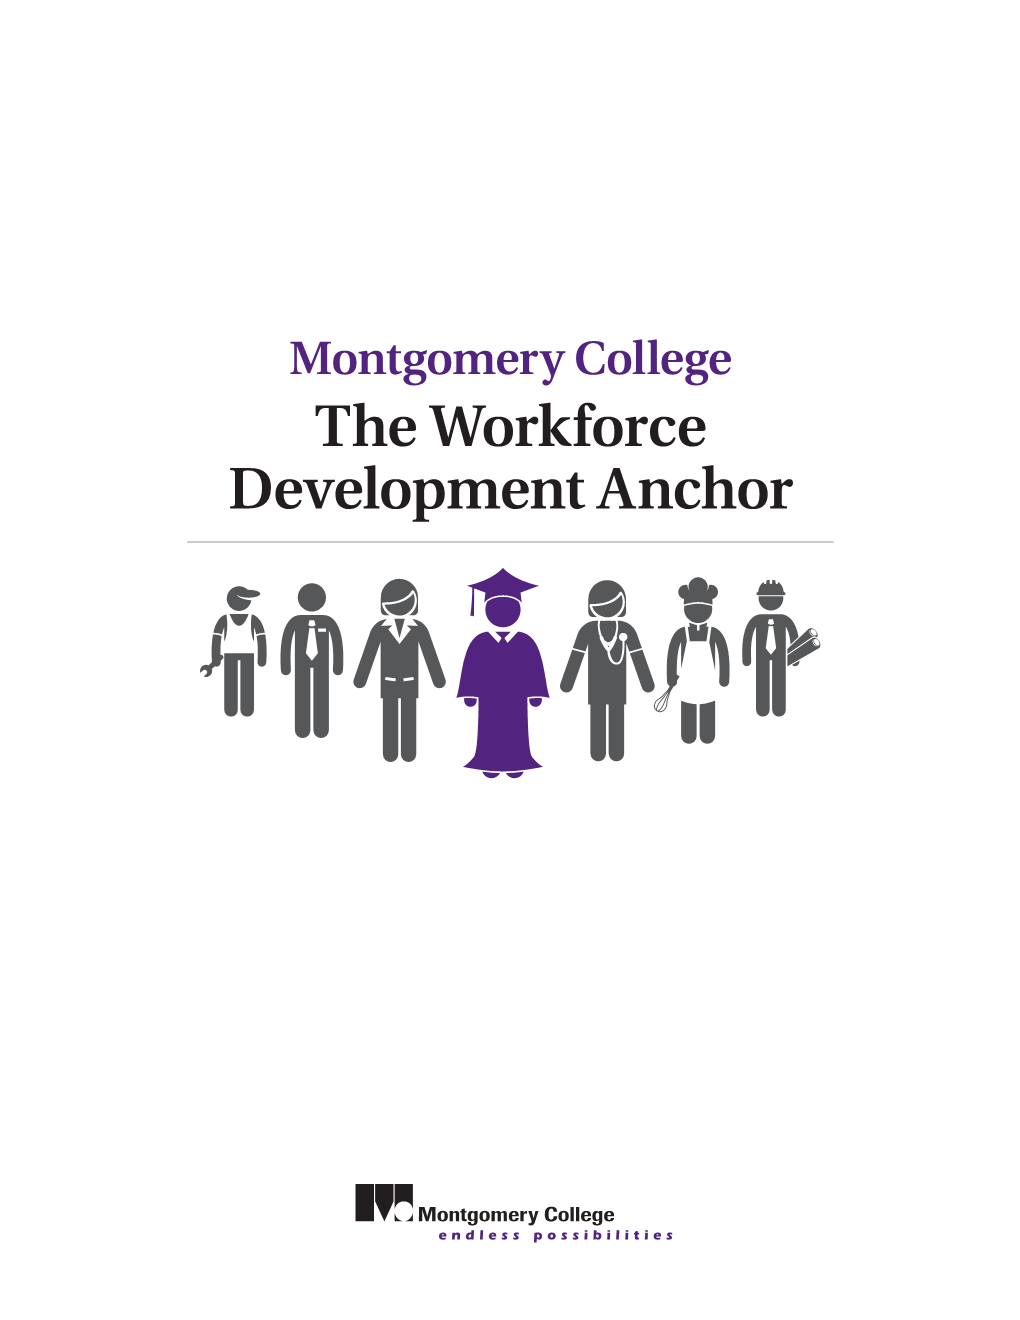 Montgomery College the Workforce Development Anchor Our Mission We Empower Our Students to Change Their Lives, and We Enrich the Life of Our Community